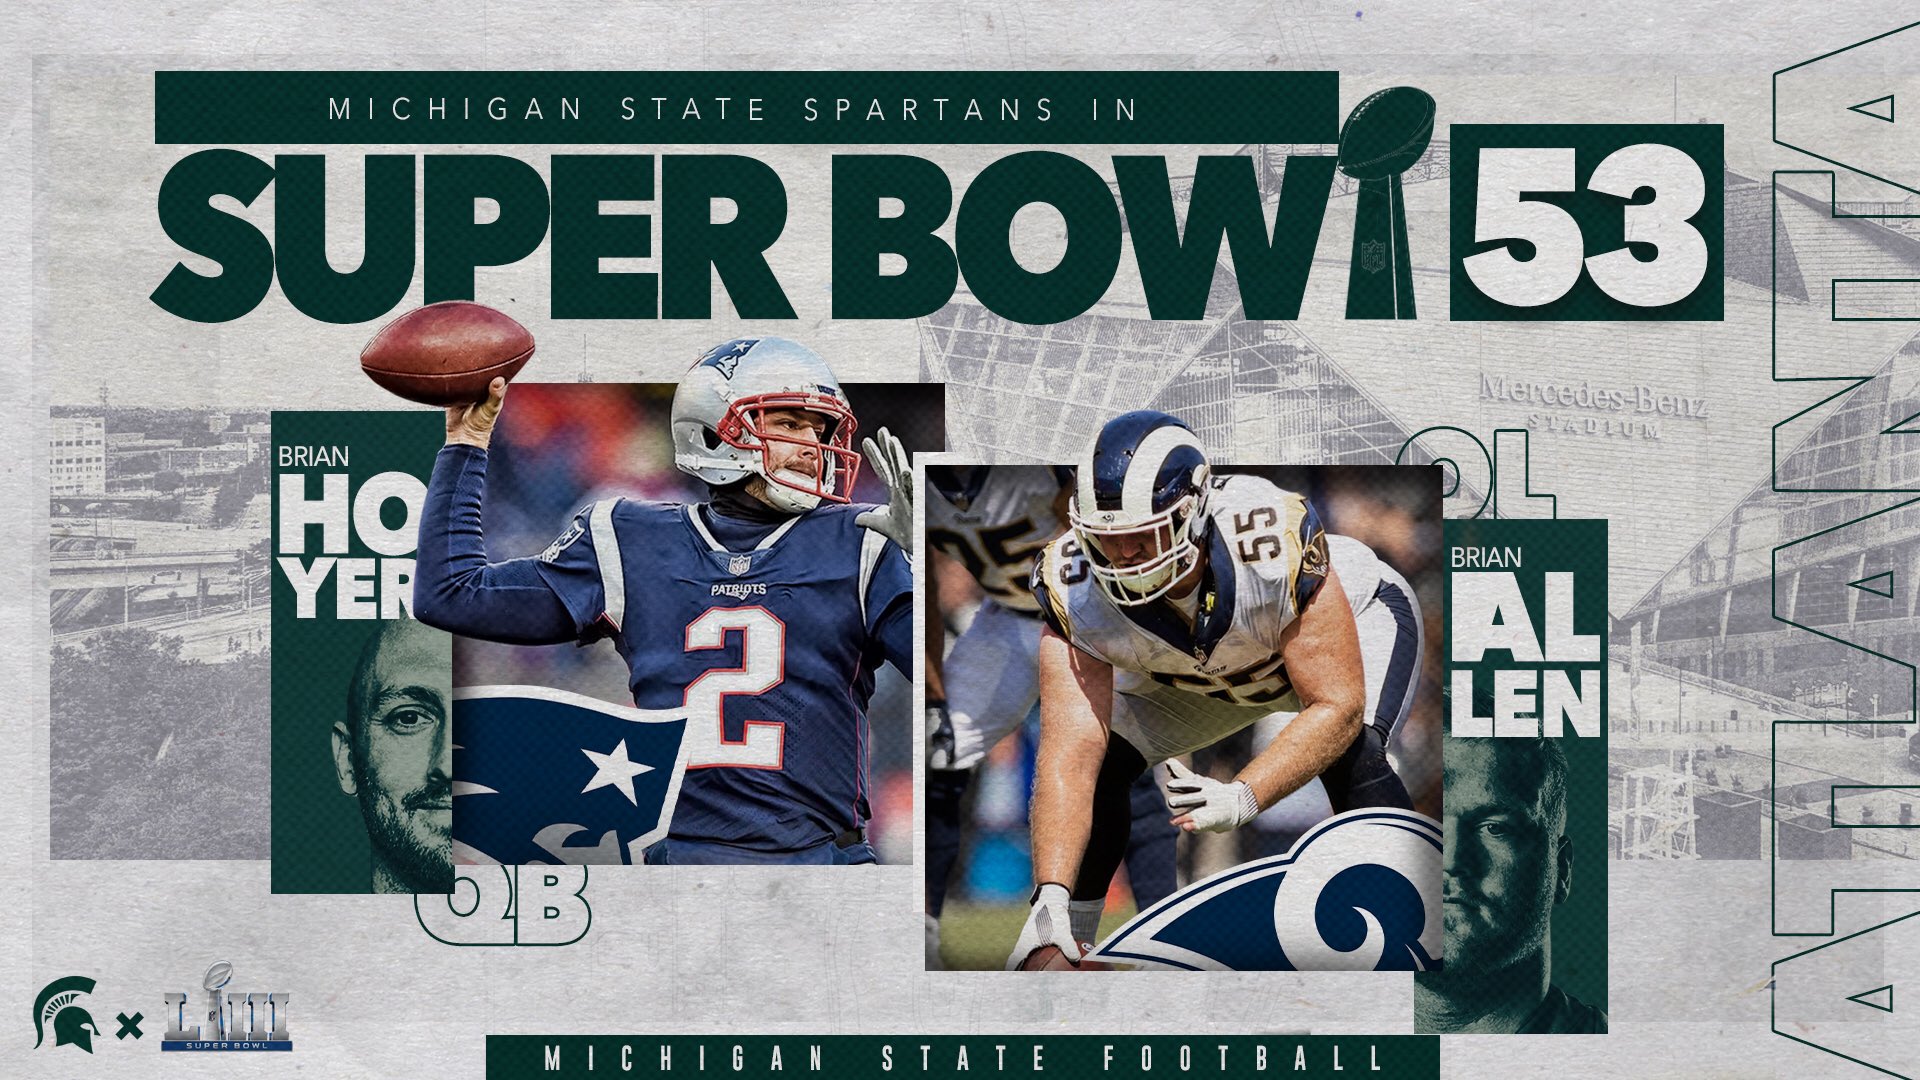 Snake Occasionally security Michigan State Football on Twitter: "Good luck to former Spartan stars,  @BrianAllen65 and Brian Hoyer, in Super Bowl 53 tonight! #GoGreen  #SpartansInTheNFL https://t.co/aKDo5DG5P5" / Twitter